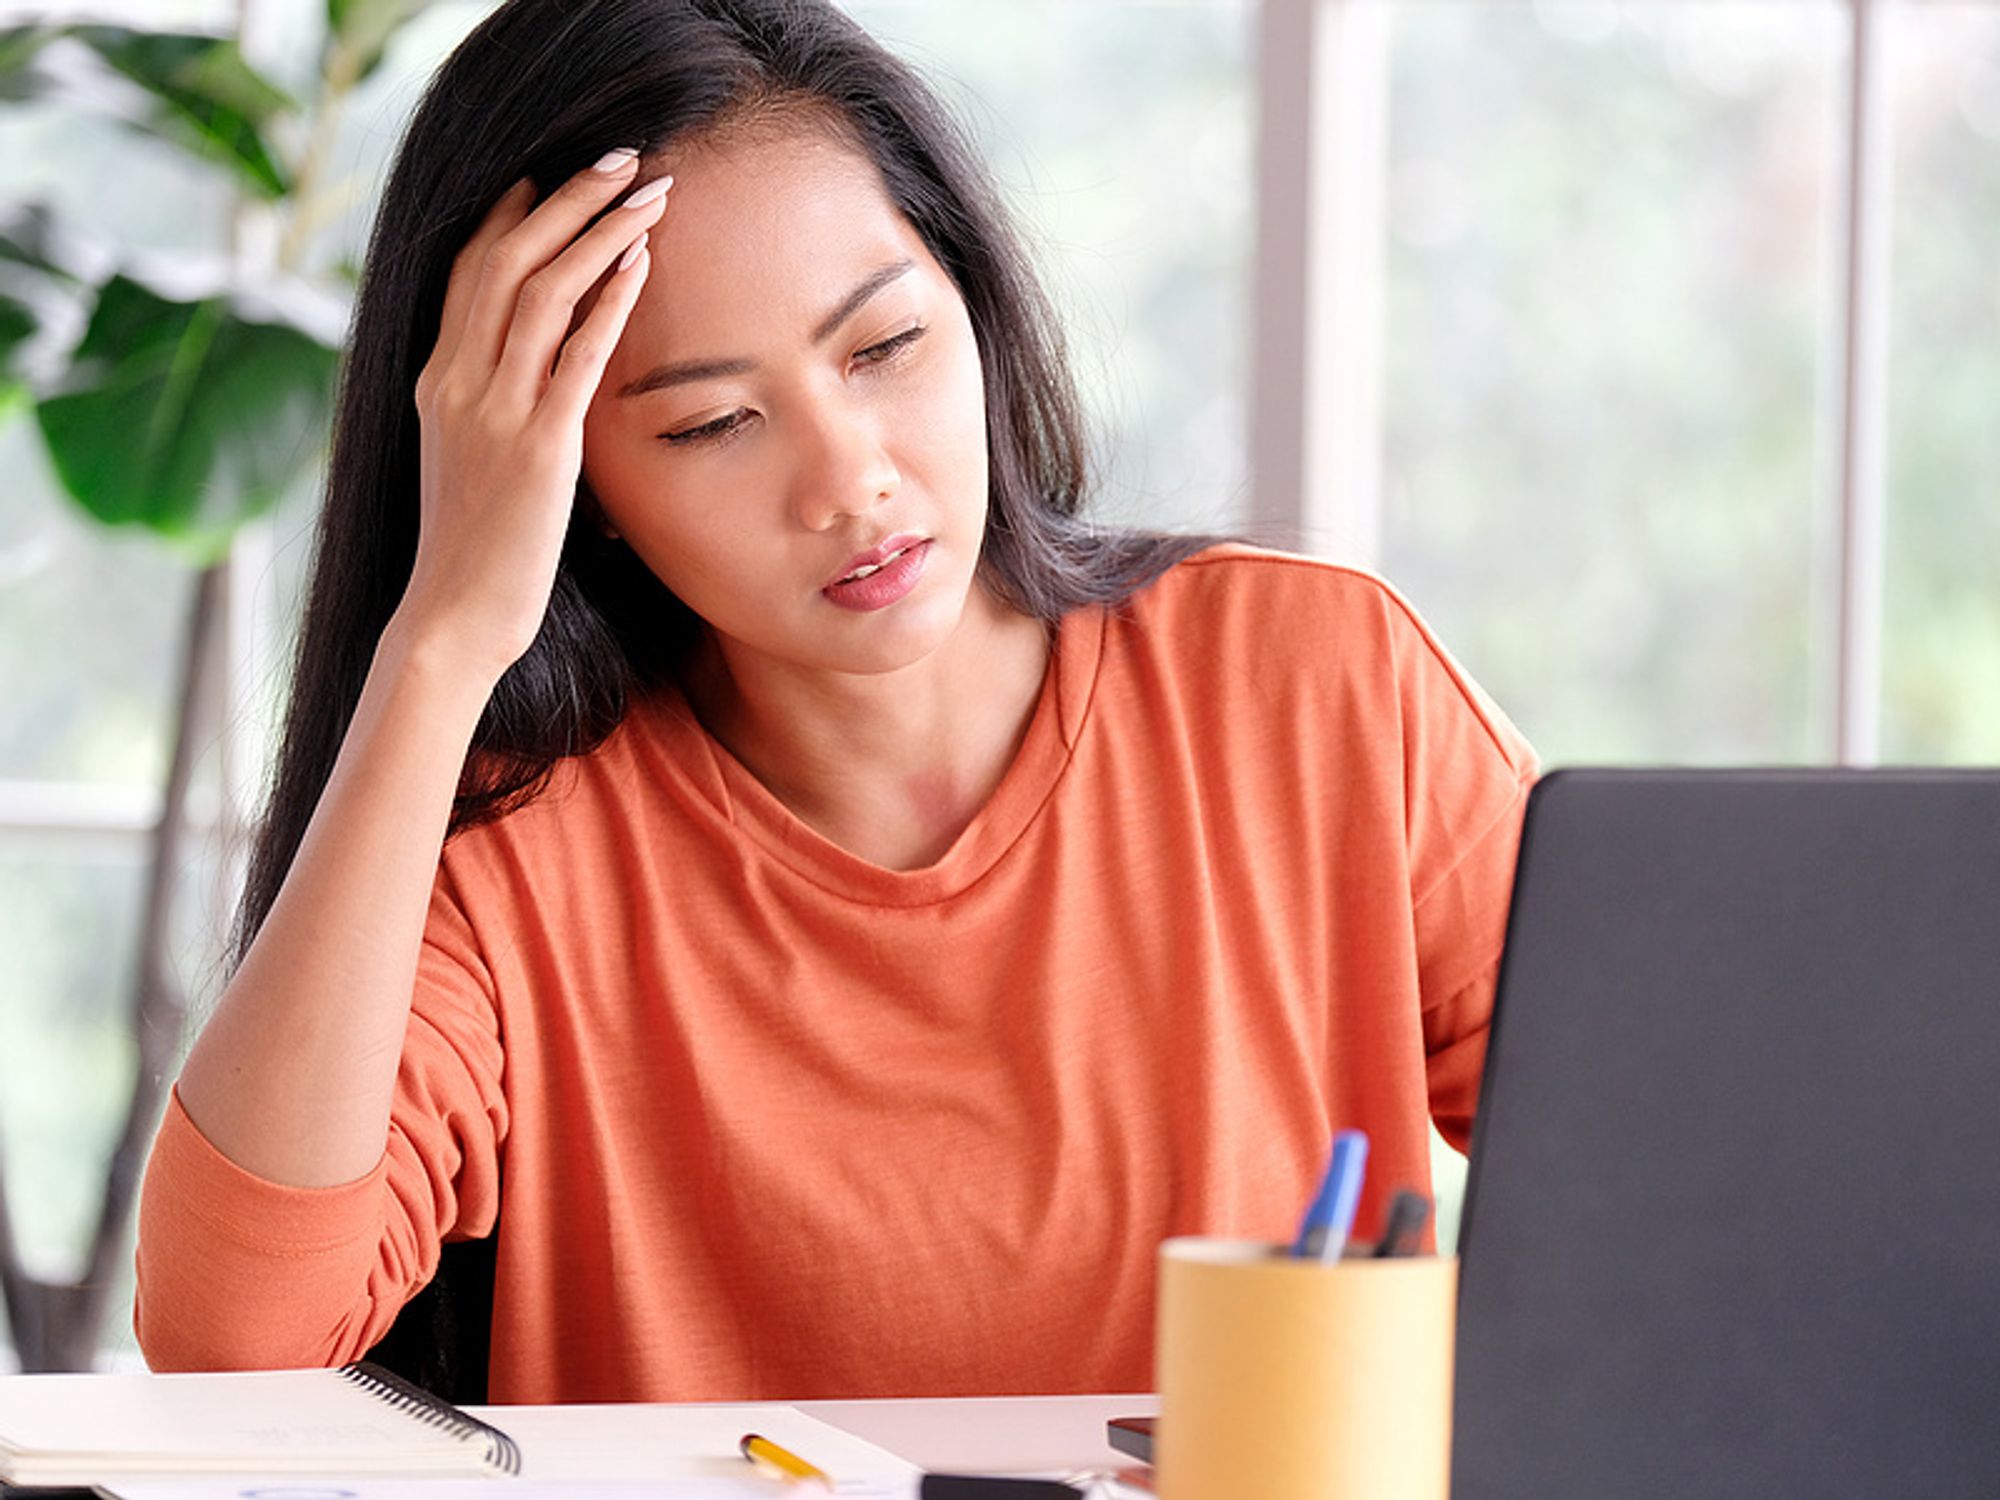 Frustrated woman on laptop struggling to stay motivated while looking for a job